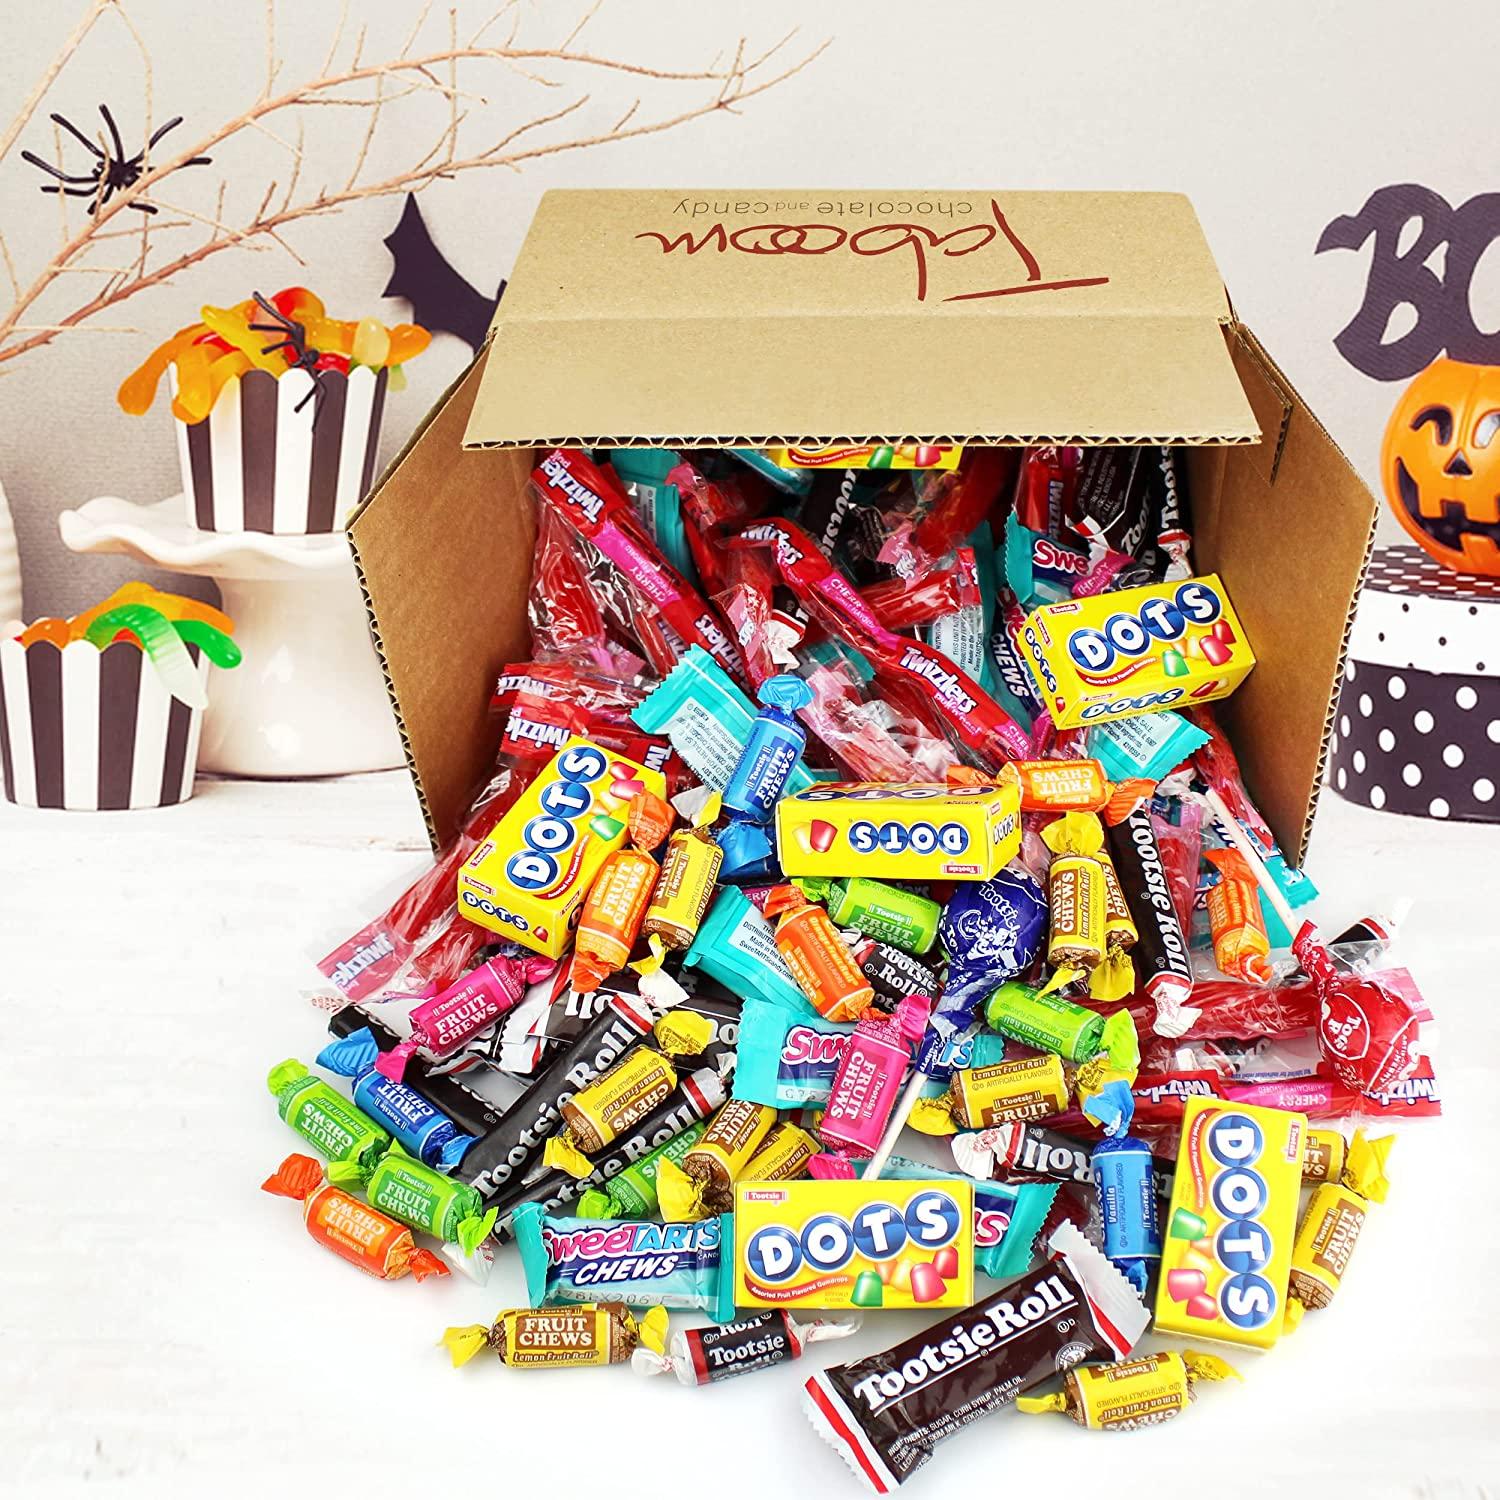 Assorted Bulk Candy, Individually Wrapped - Bulk Halloween Candy 5 LB Box  Variety Pack with Tootsie Rolls, Tootsie Pops, Assorted Laffy Taffy's,  Dots, Twizzlers, Assorted Jolly Rancher & Snacks More! 5 Pound (Pack of 1)